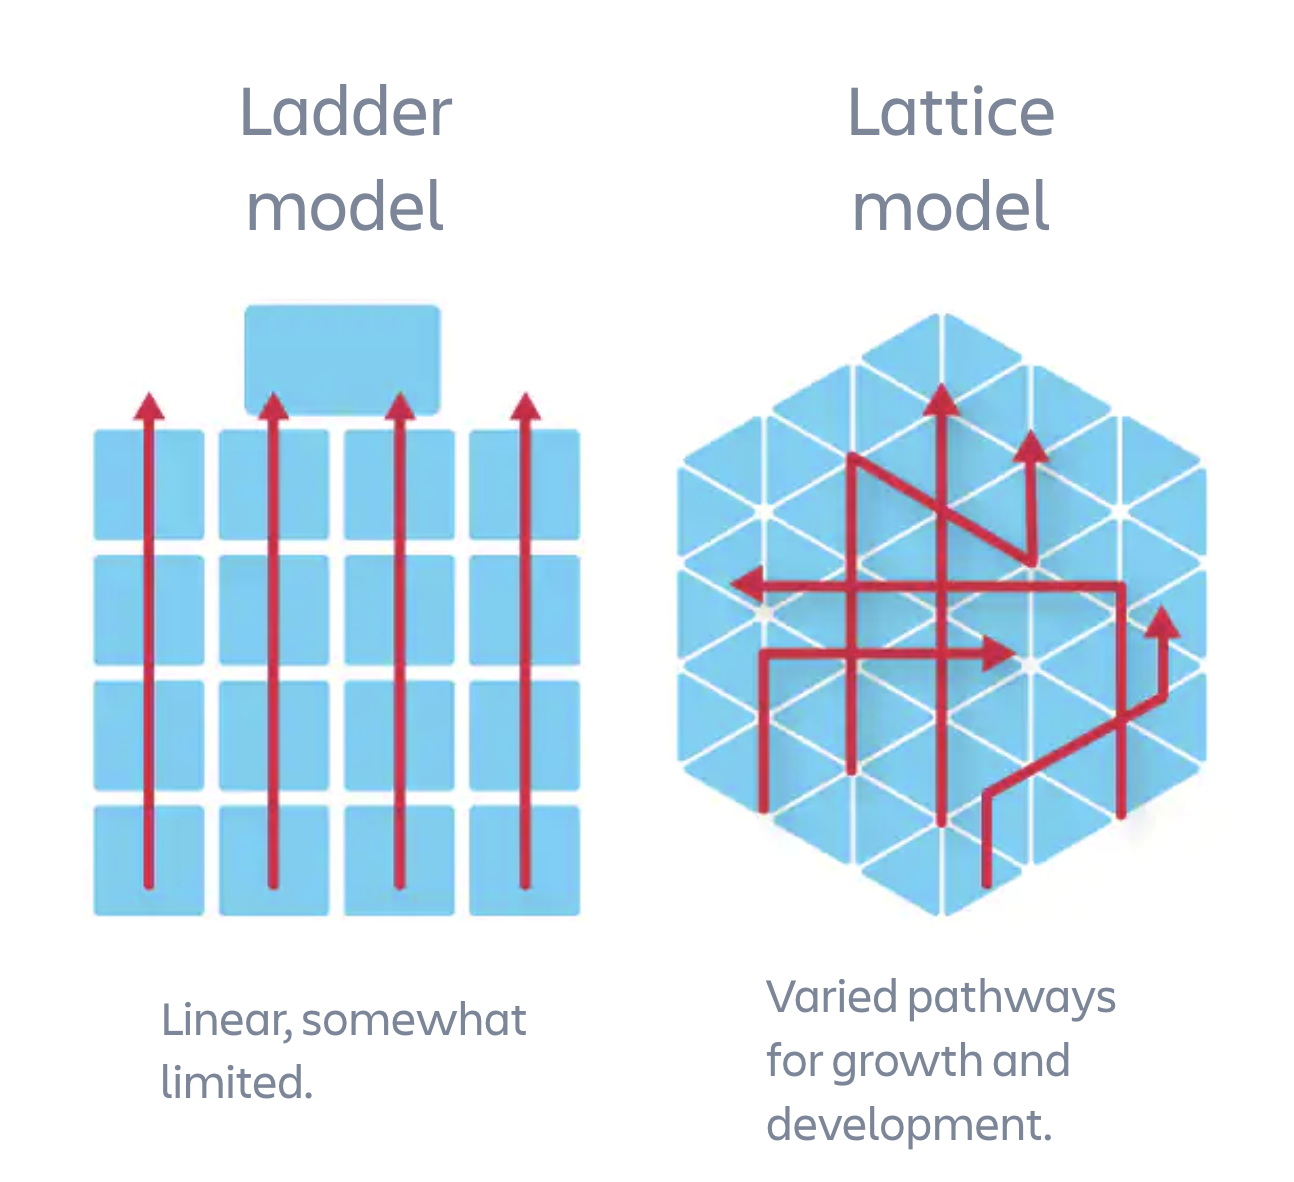 Illustrations of the "ladder" and "lattice" career path models